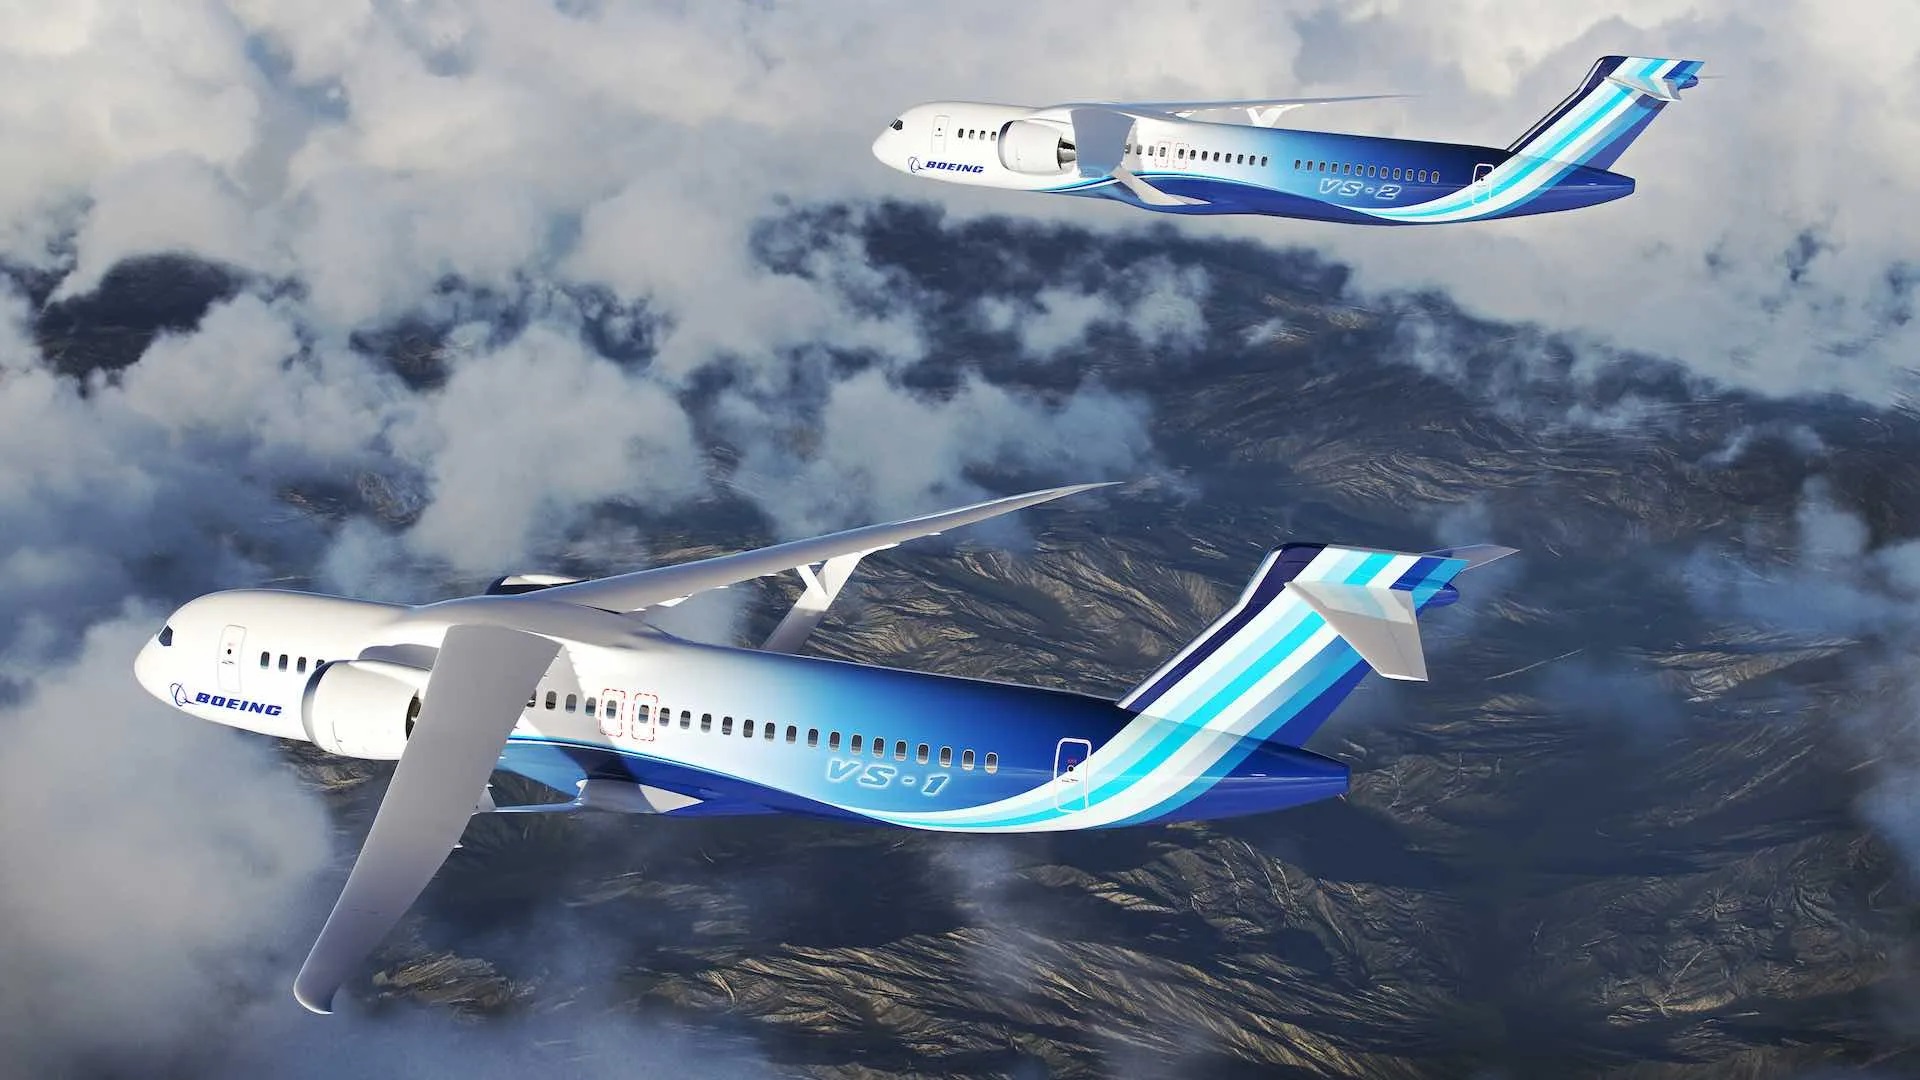 NASA and Boeing will develop a more fuel-efficient aircraft design